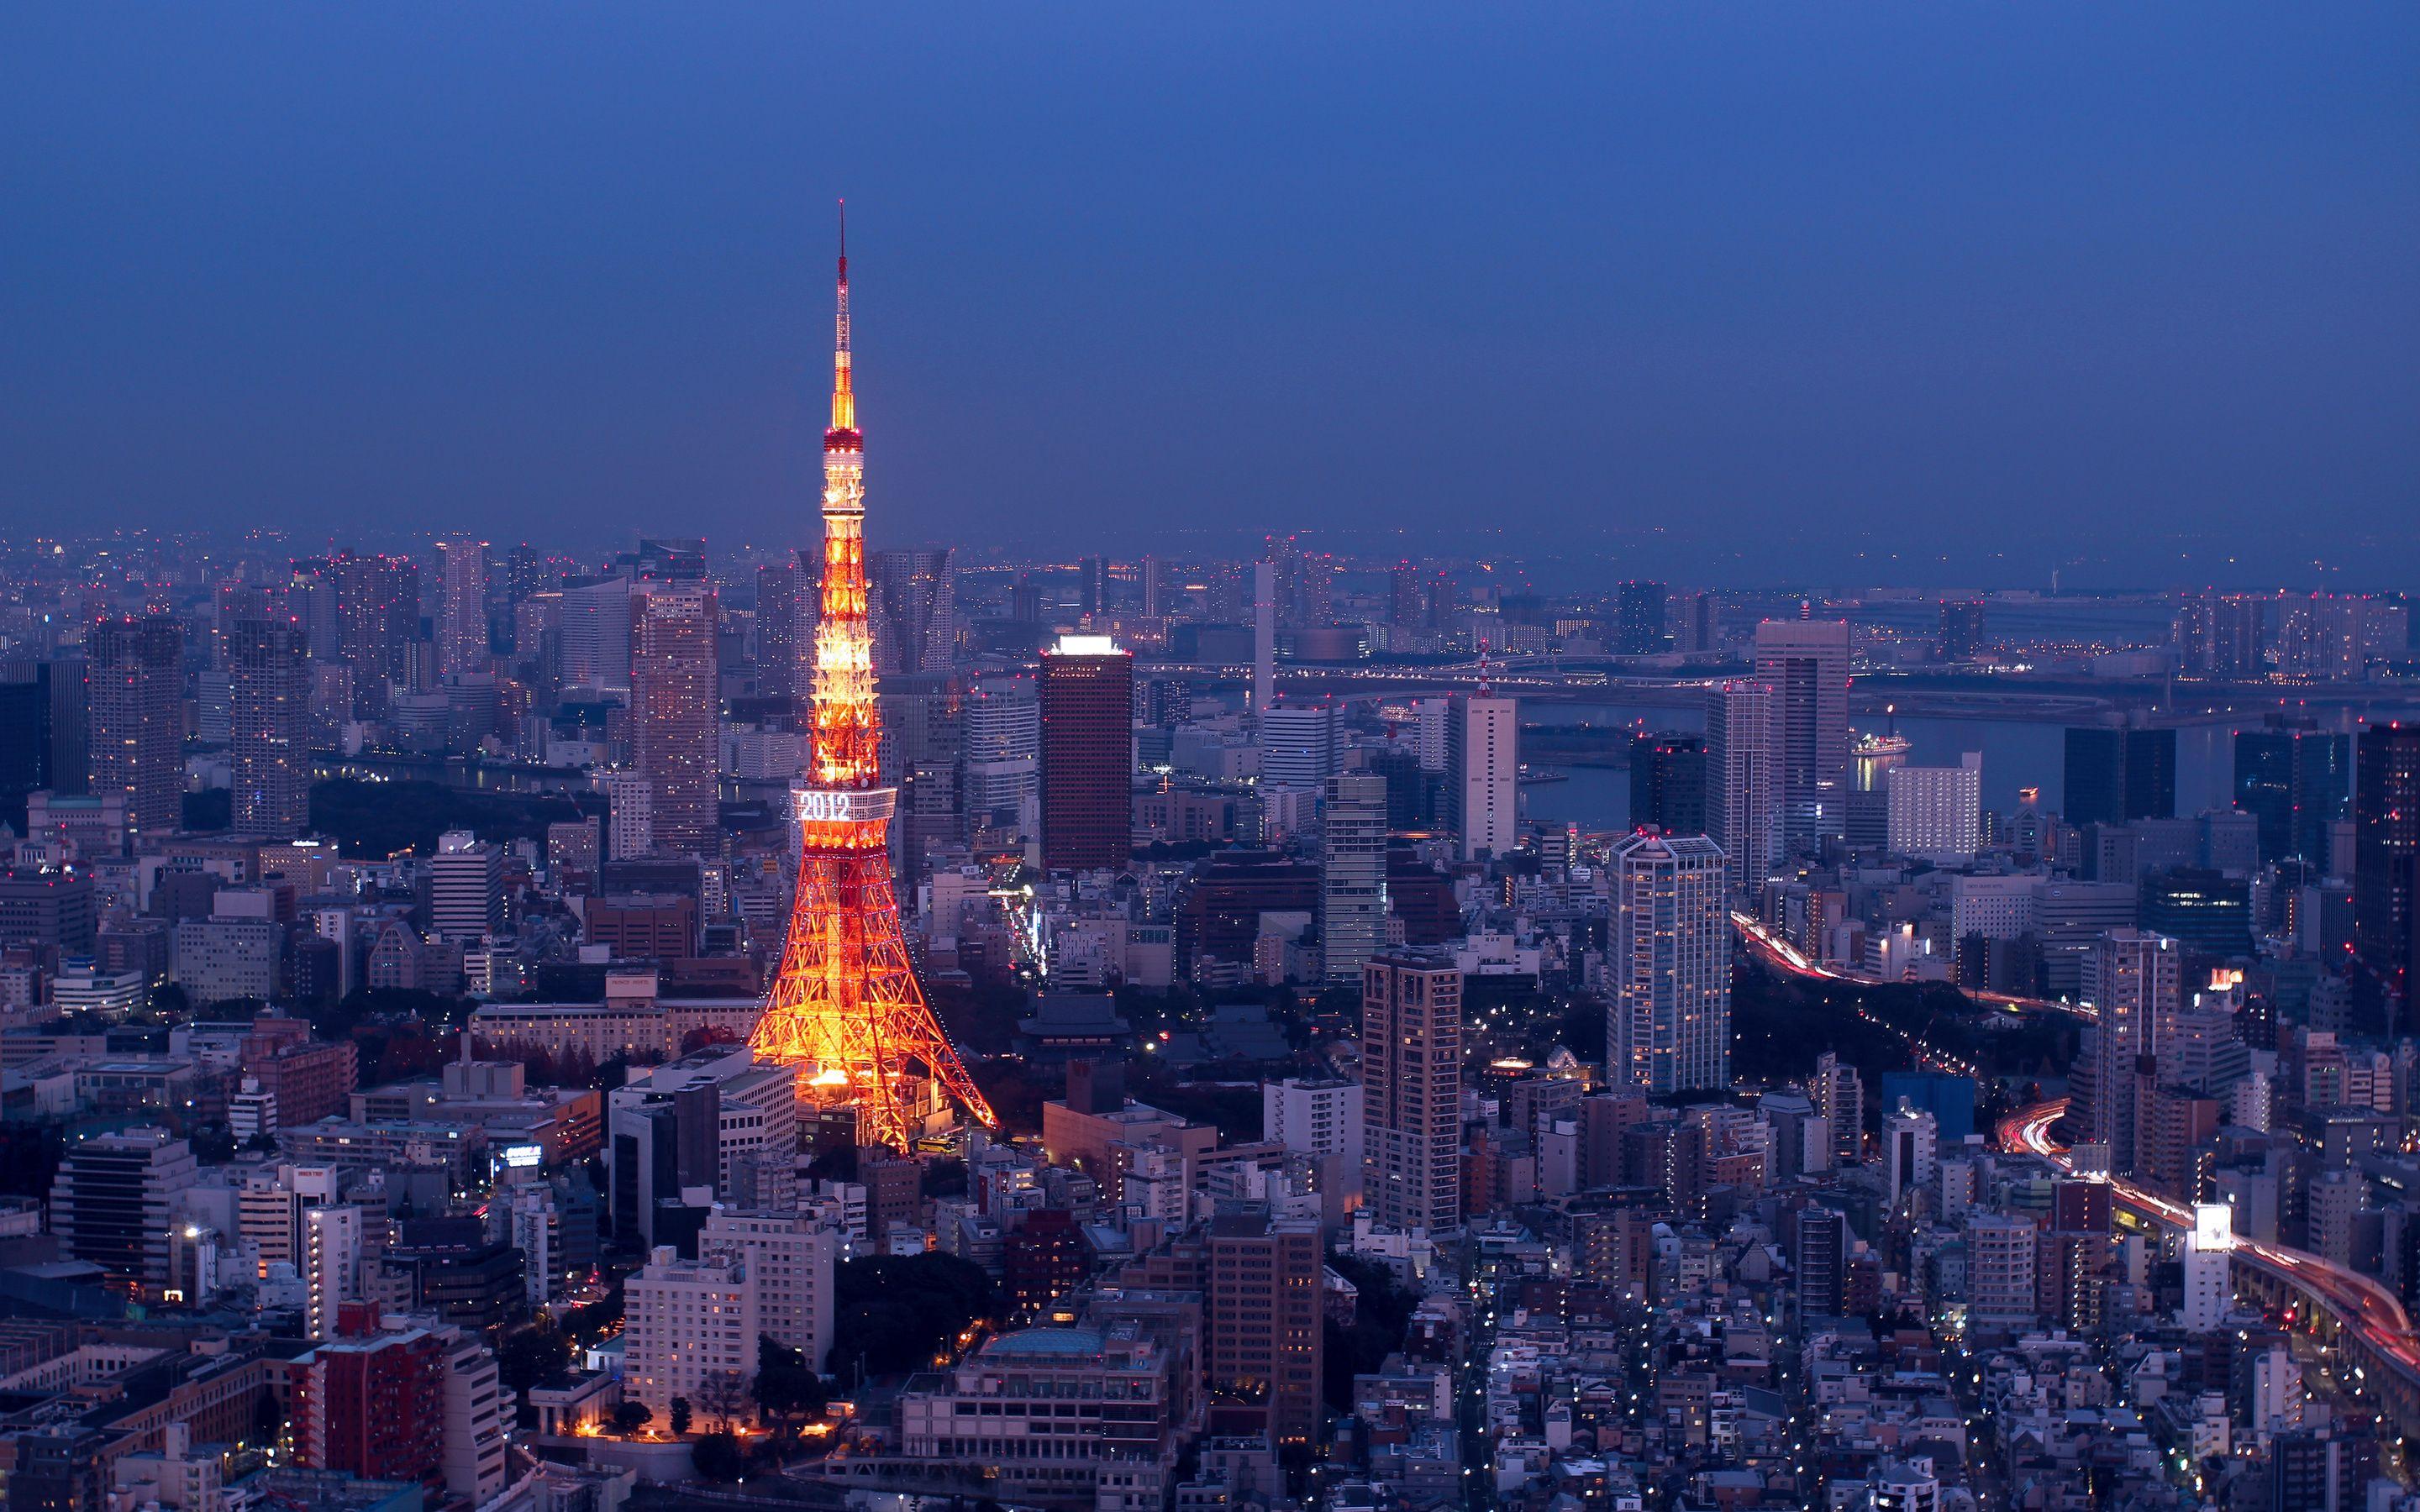 Tokyo city wallpaper and image, picture, photo